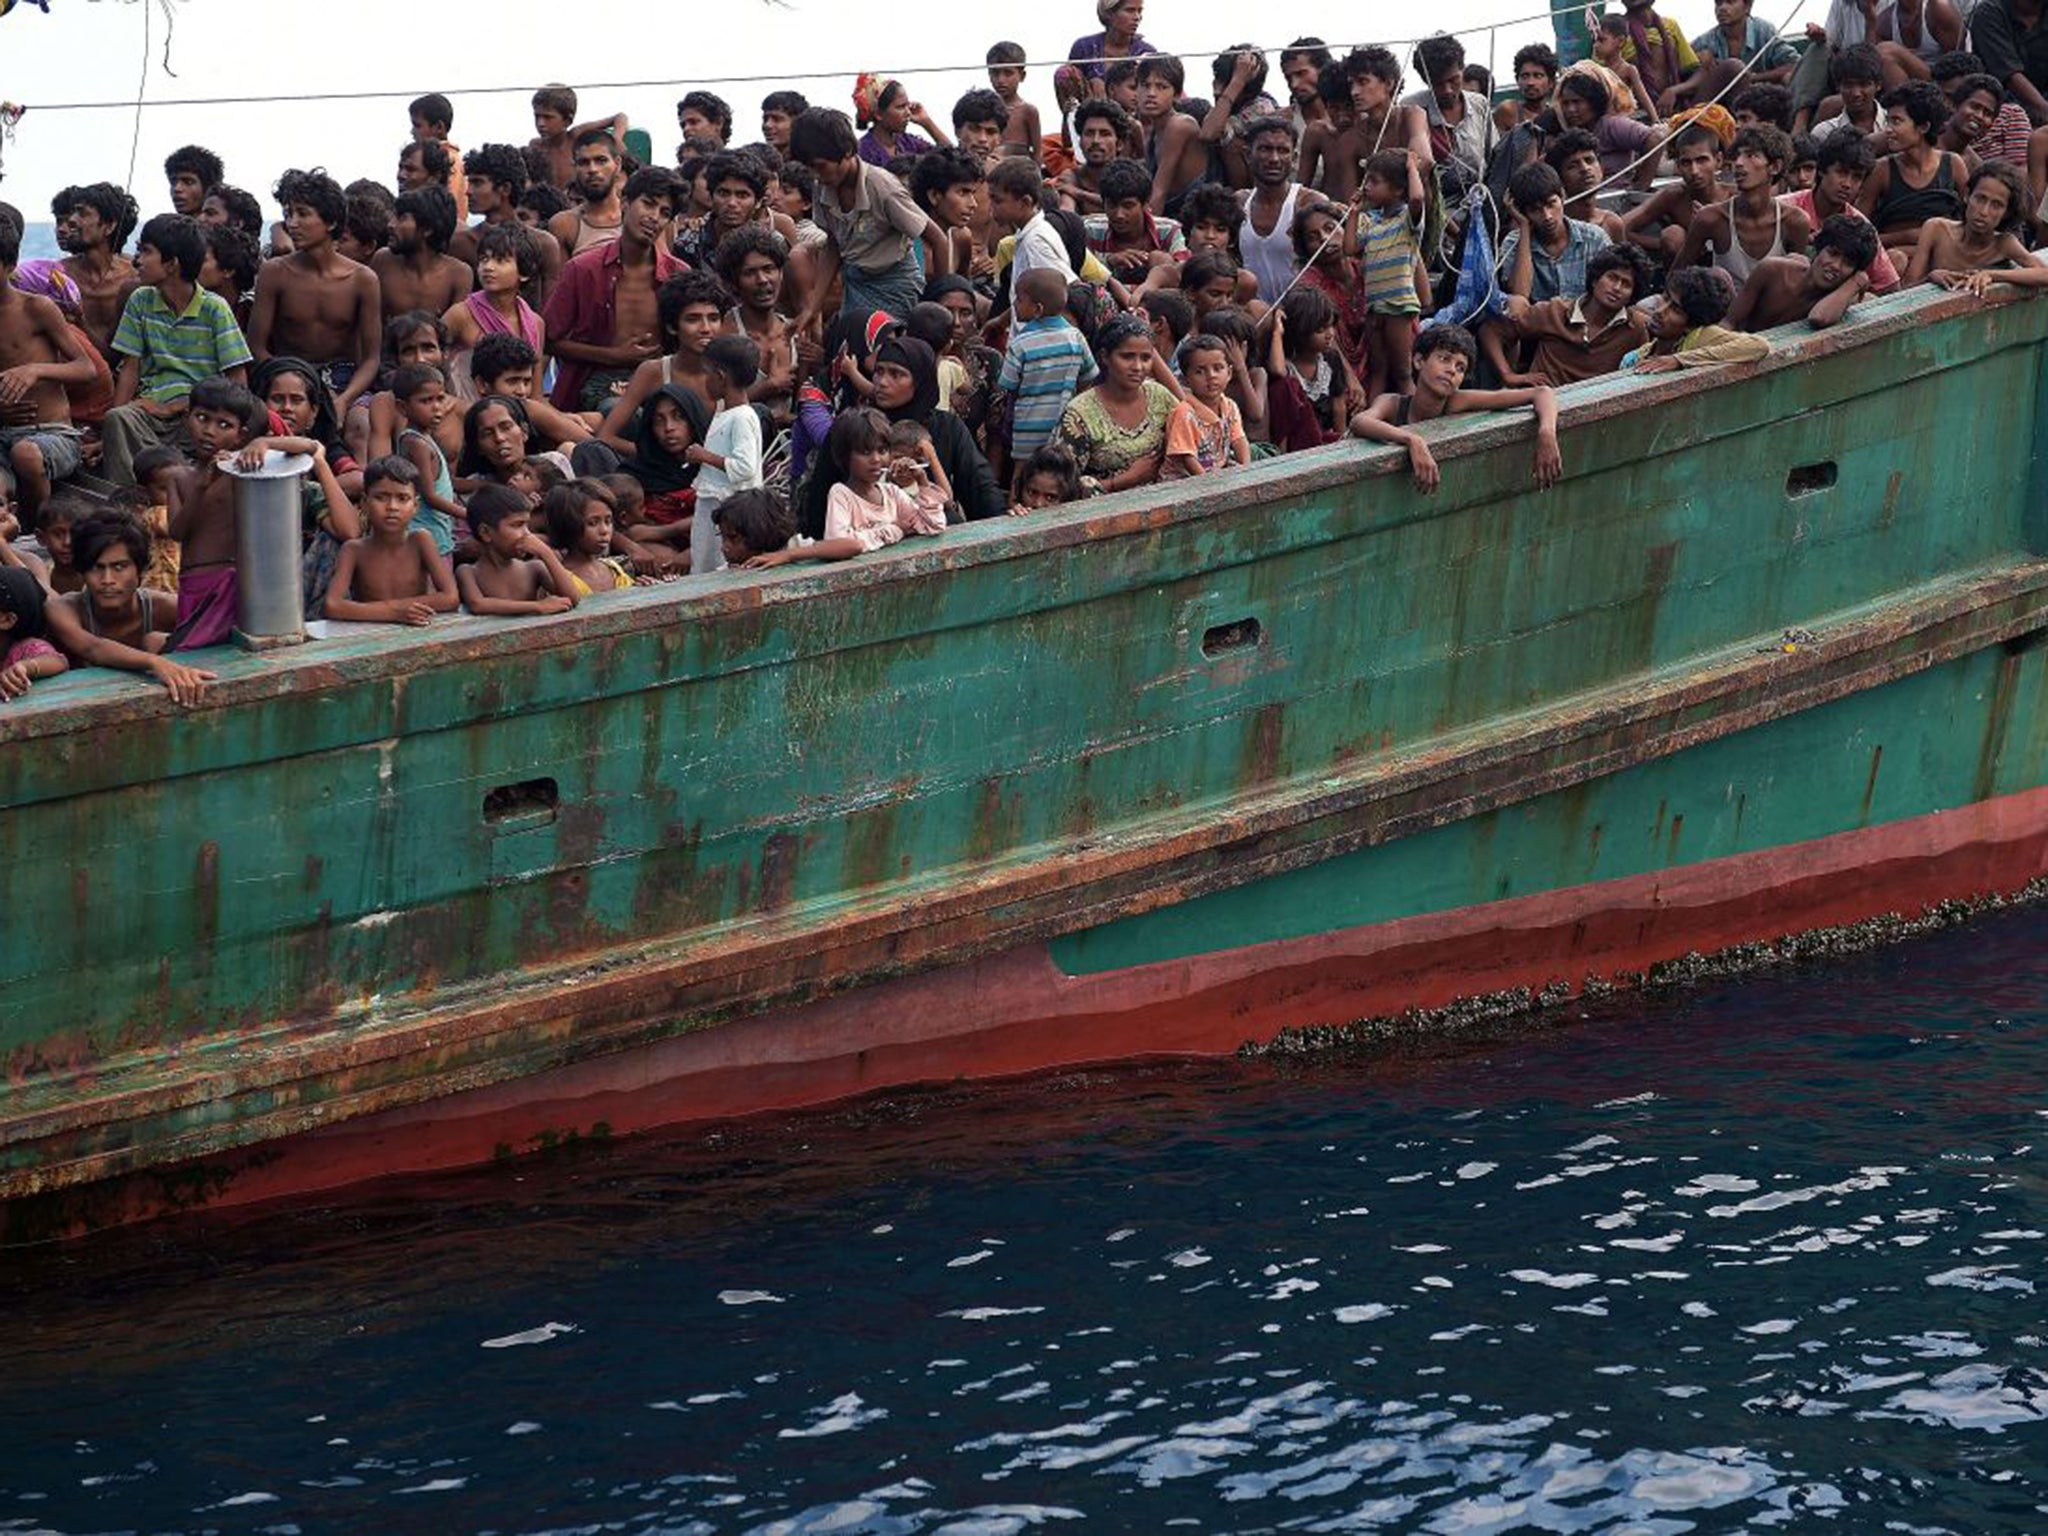 Boats bearing an estimated 8,000 more people continue to wallow in the Andaman Sea, refused permission to land by Thailand, Indonesia and Malaysia